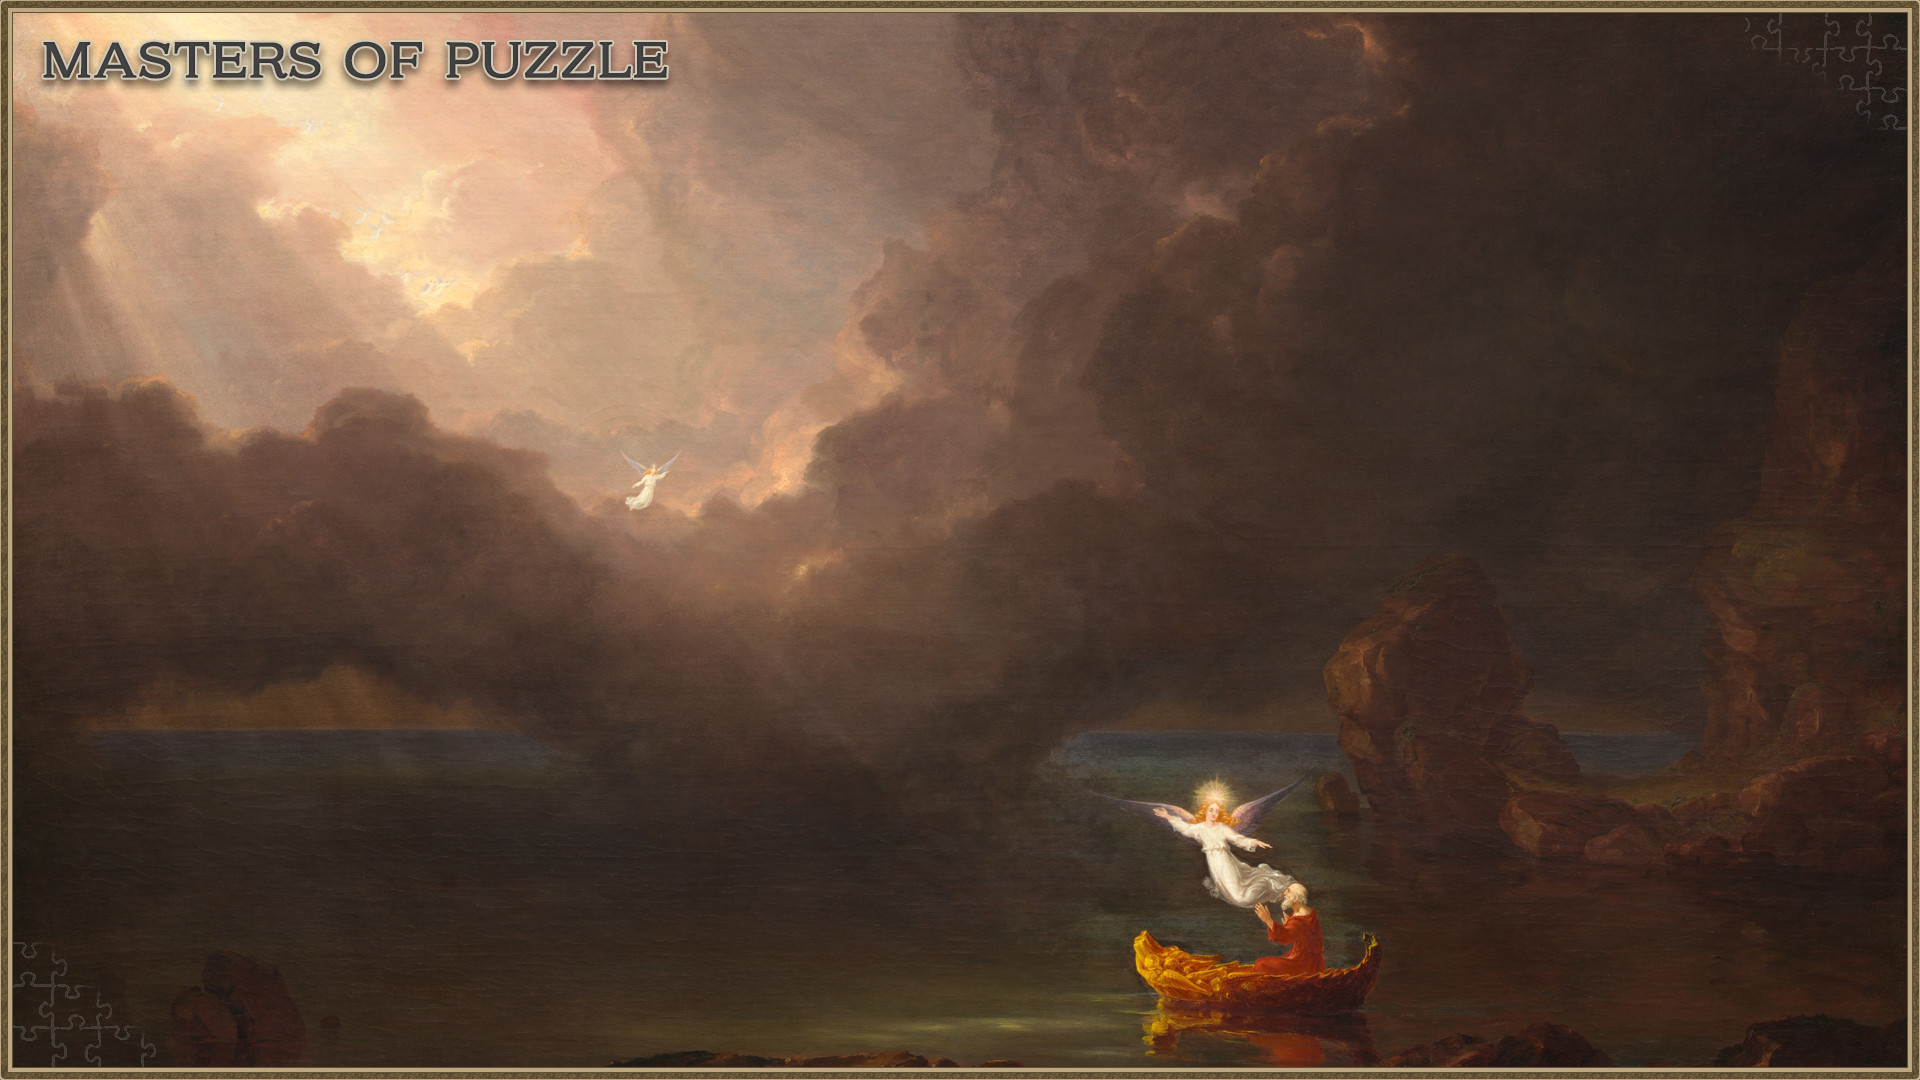 Masters of Puzzle - Old Age by Thomas Cole Featured Screenshot #1